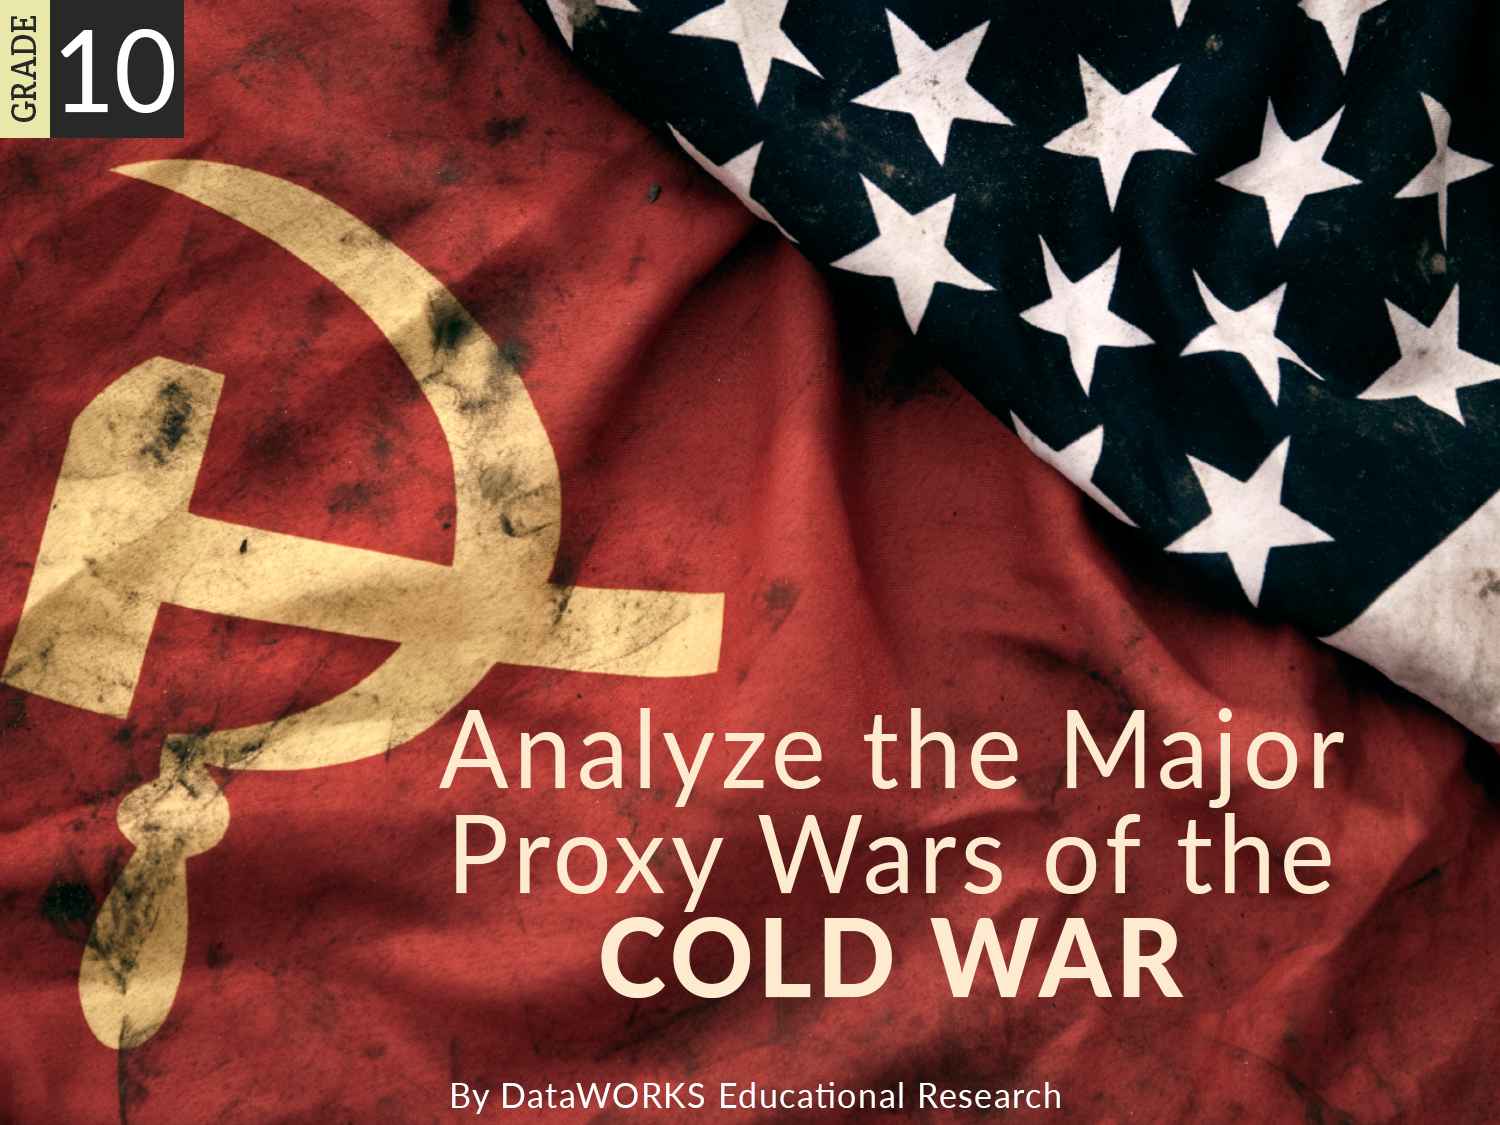 surrogate wars in the cold war